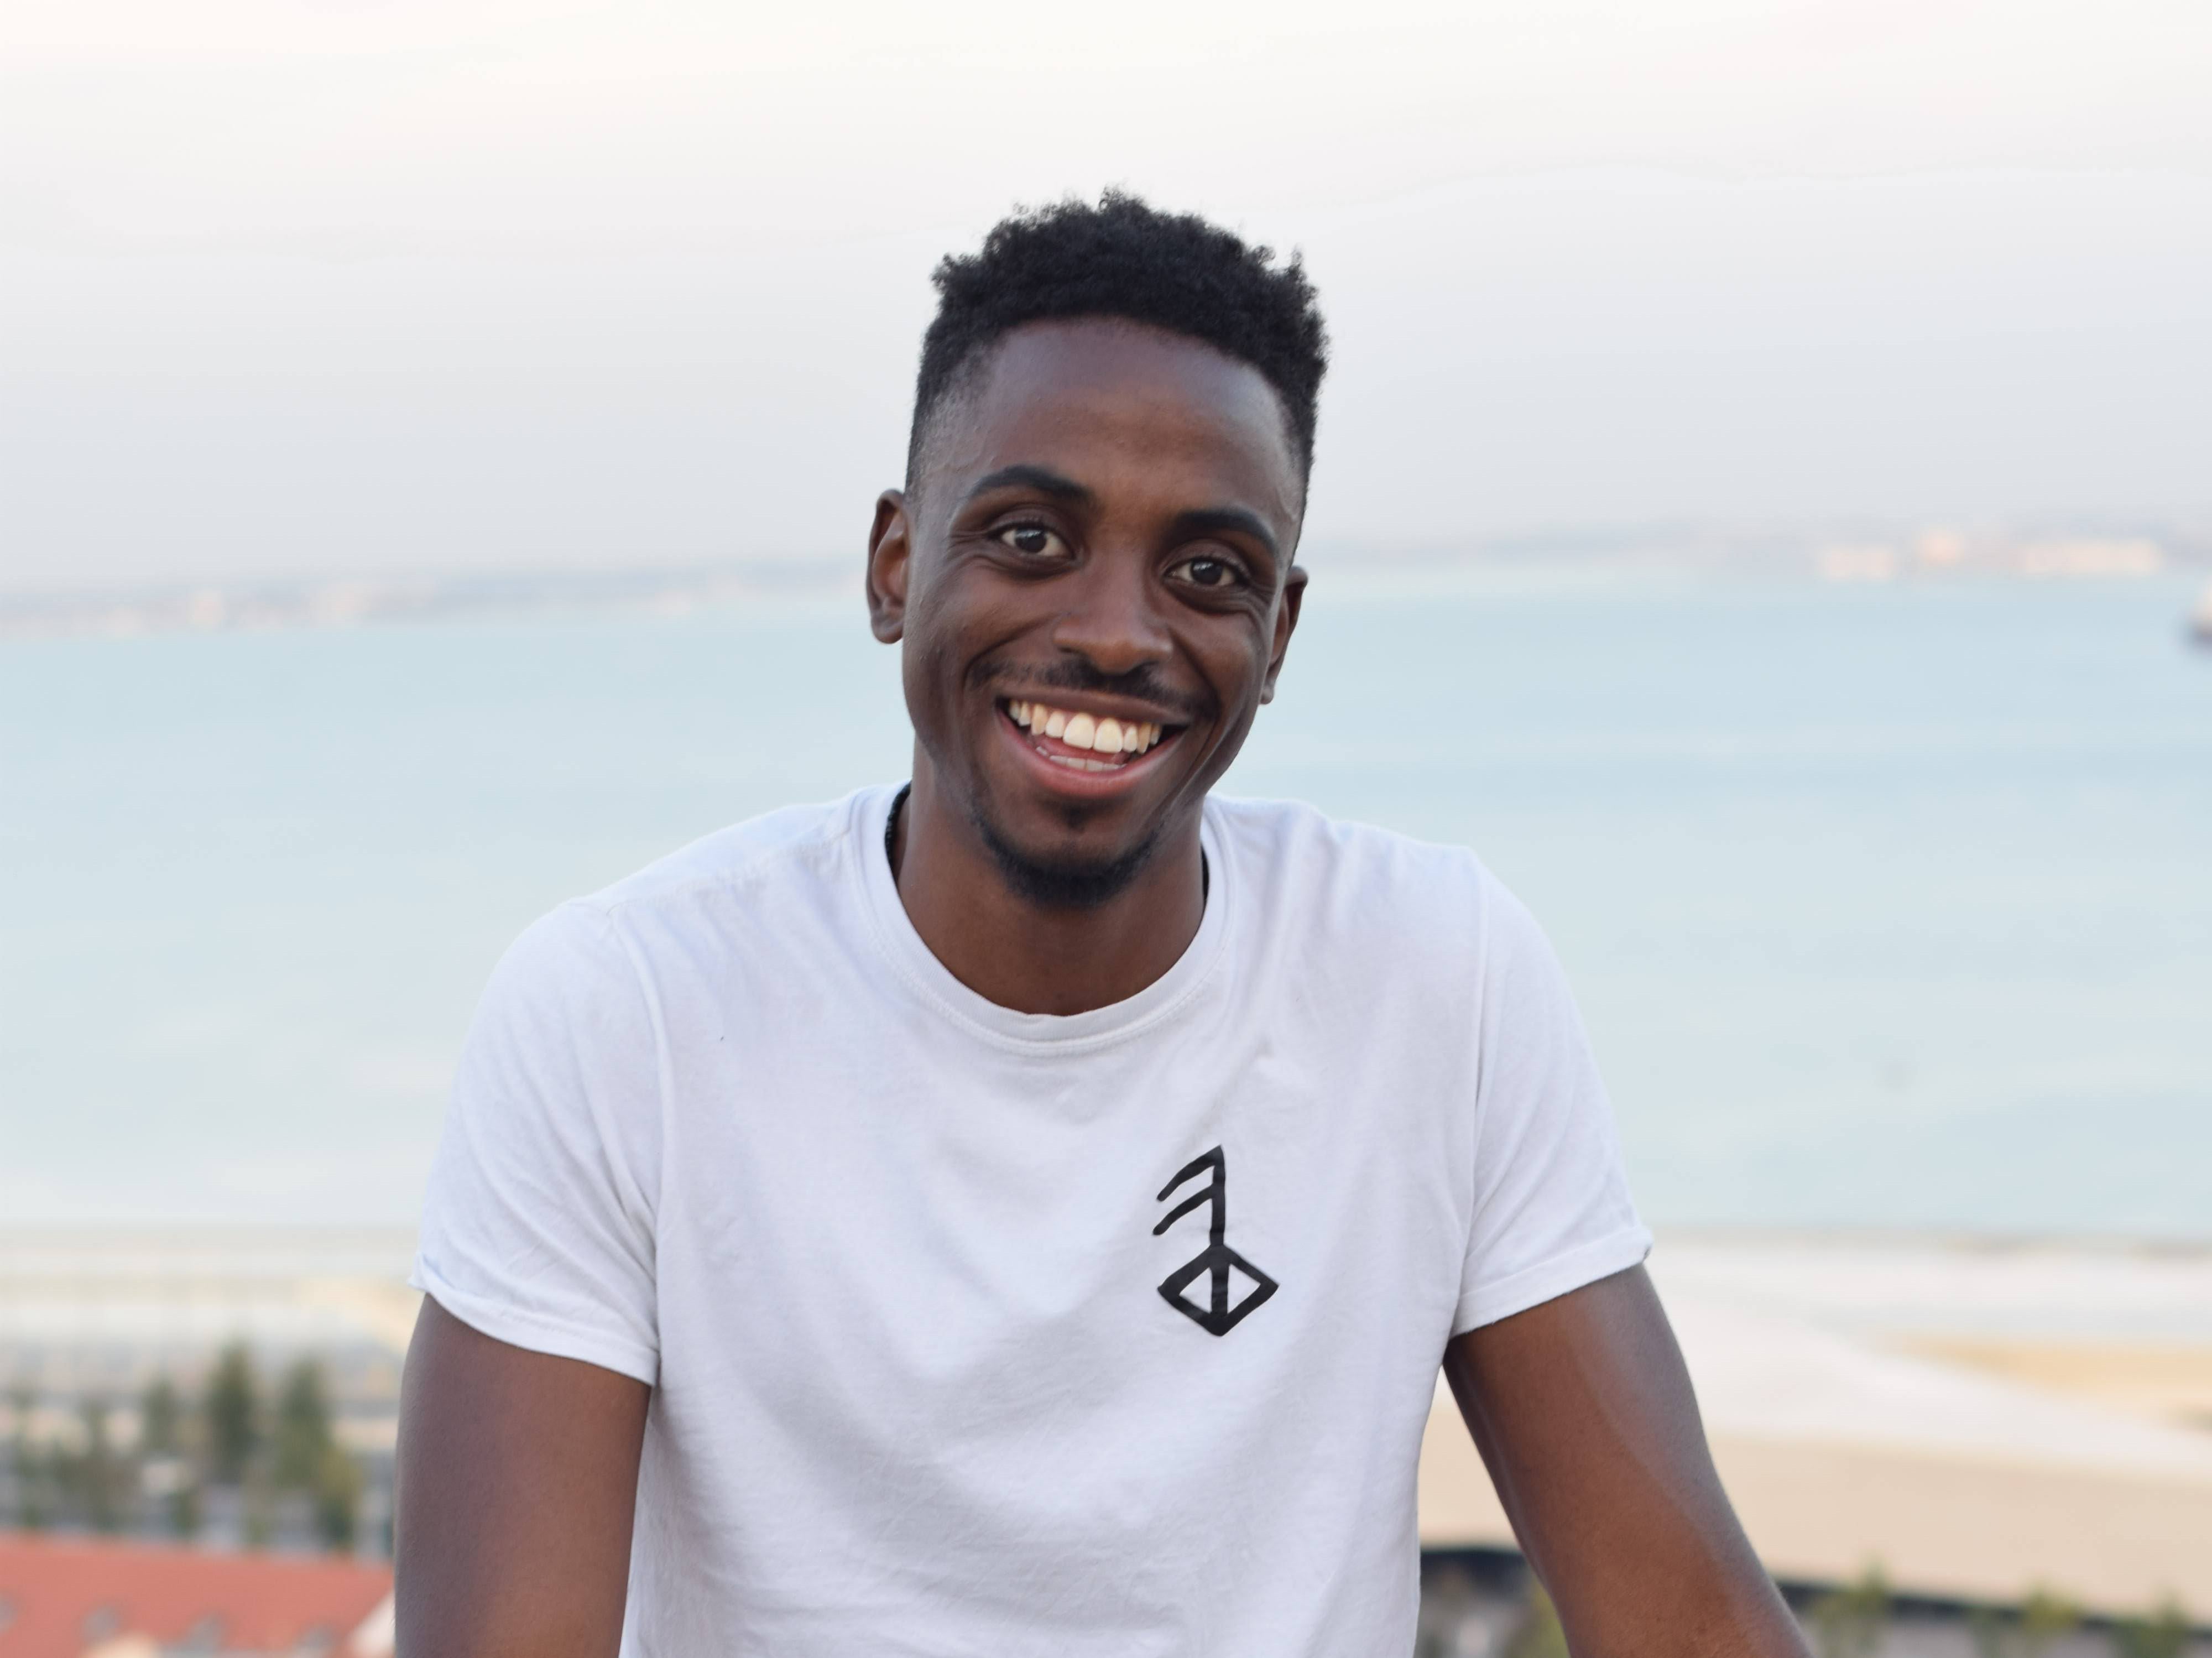 Karama began his entrepreneurial journey with five-a-side website Pitch Up